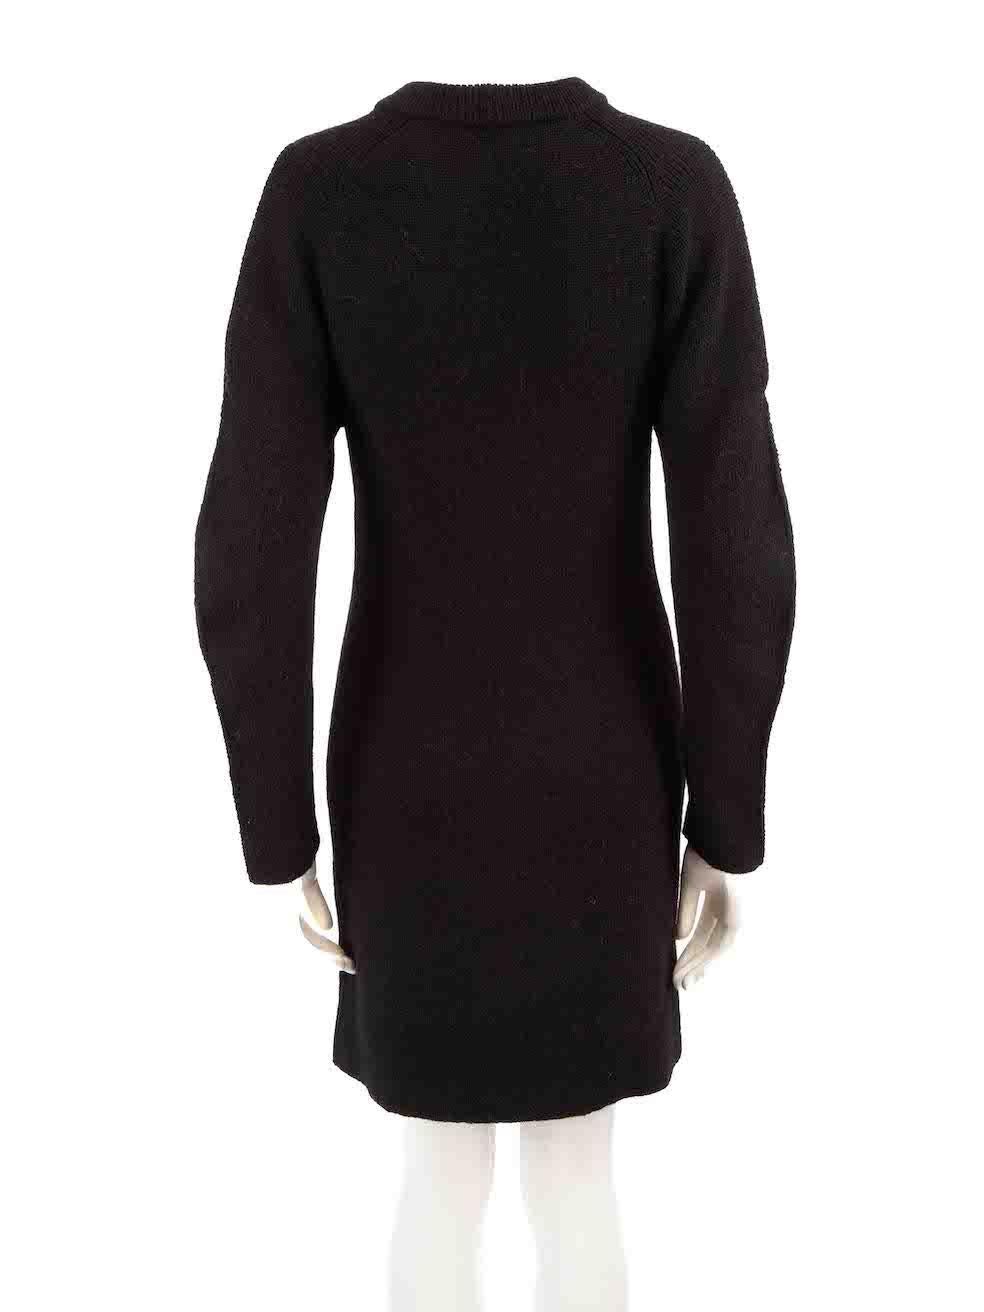 Chloé Black Wool Cold Shoulder Knit Dress Size XS In Good Condition For Sale In London, GB